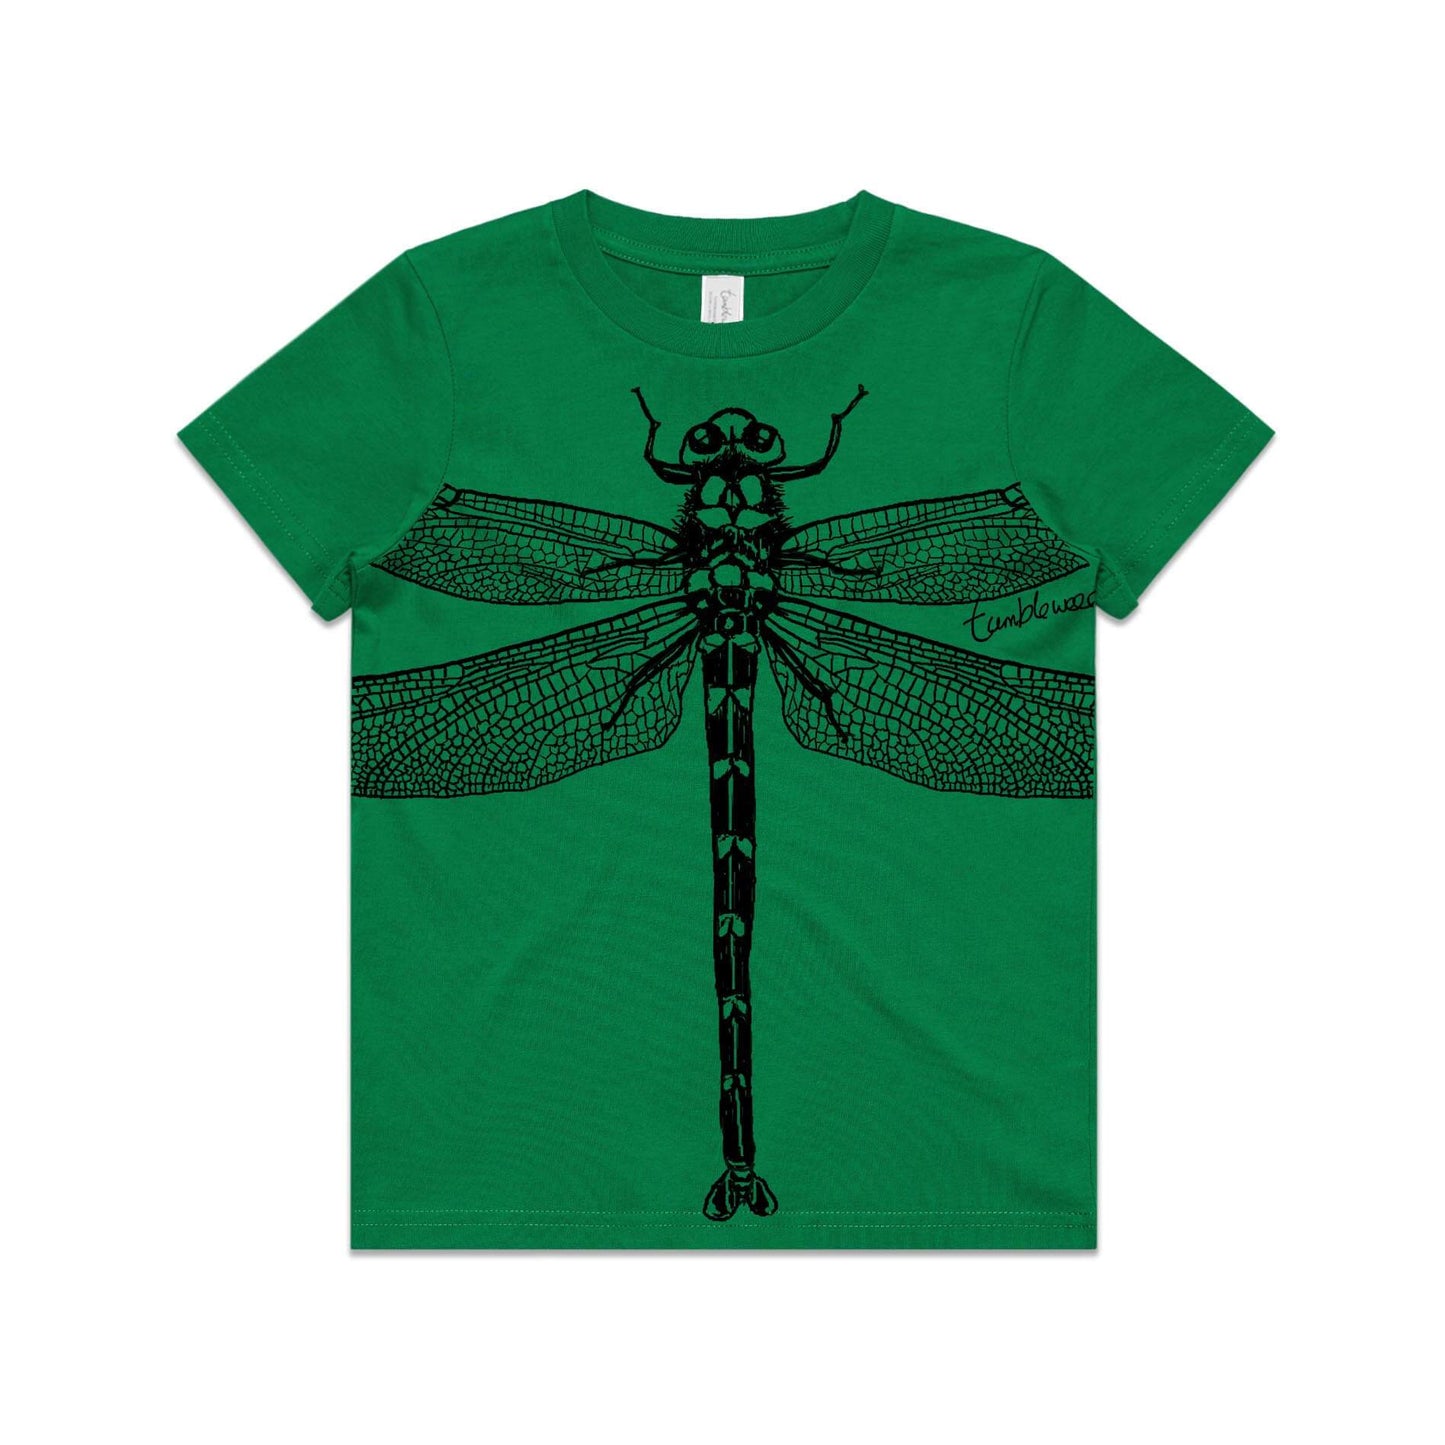 Green, cotton kids' t-shirt with screen printed Kids dragonfly design.